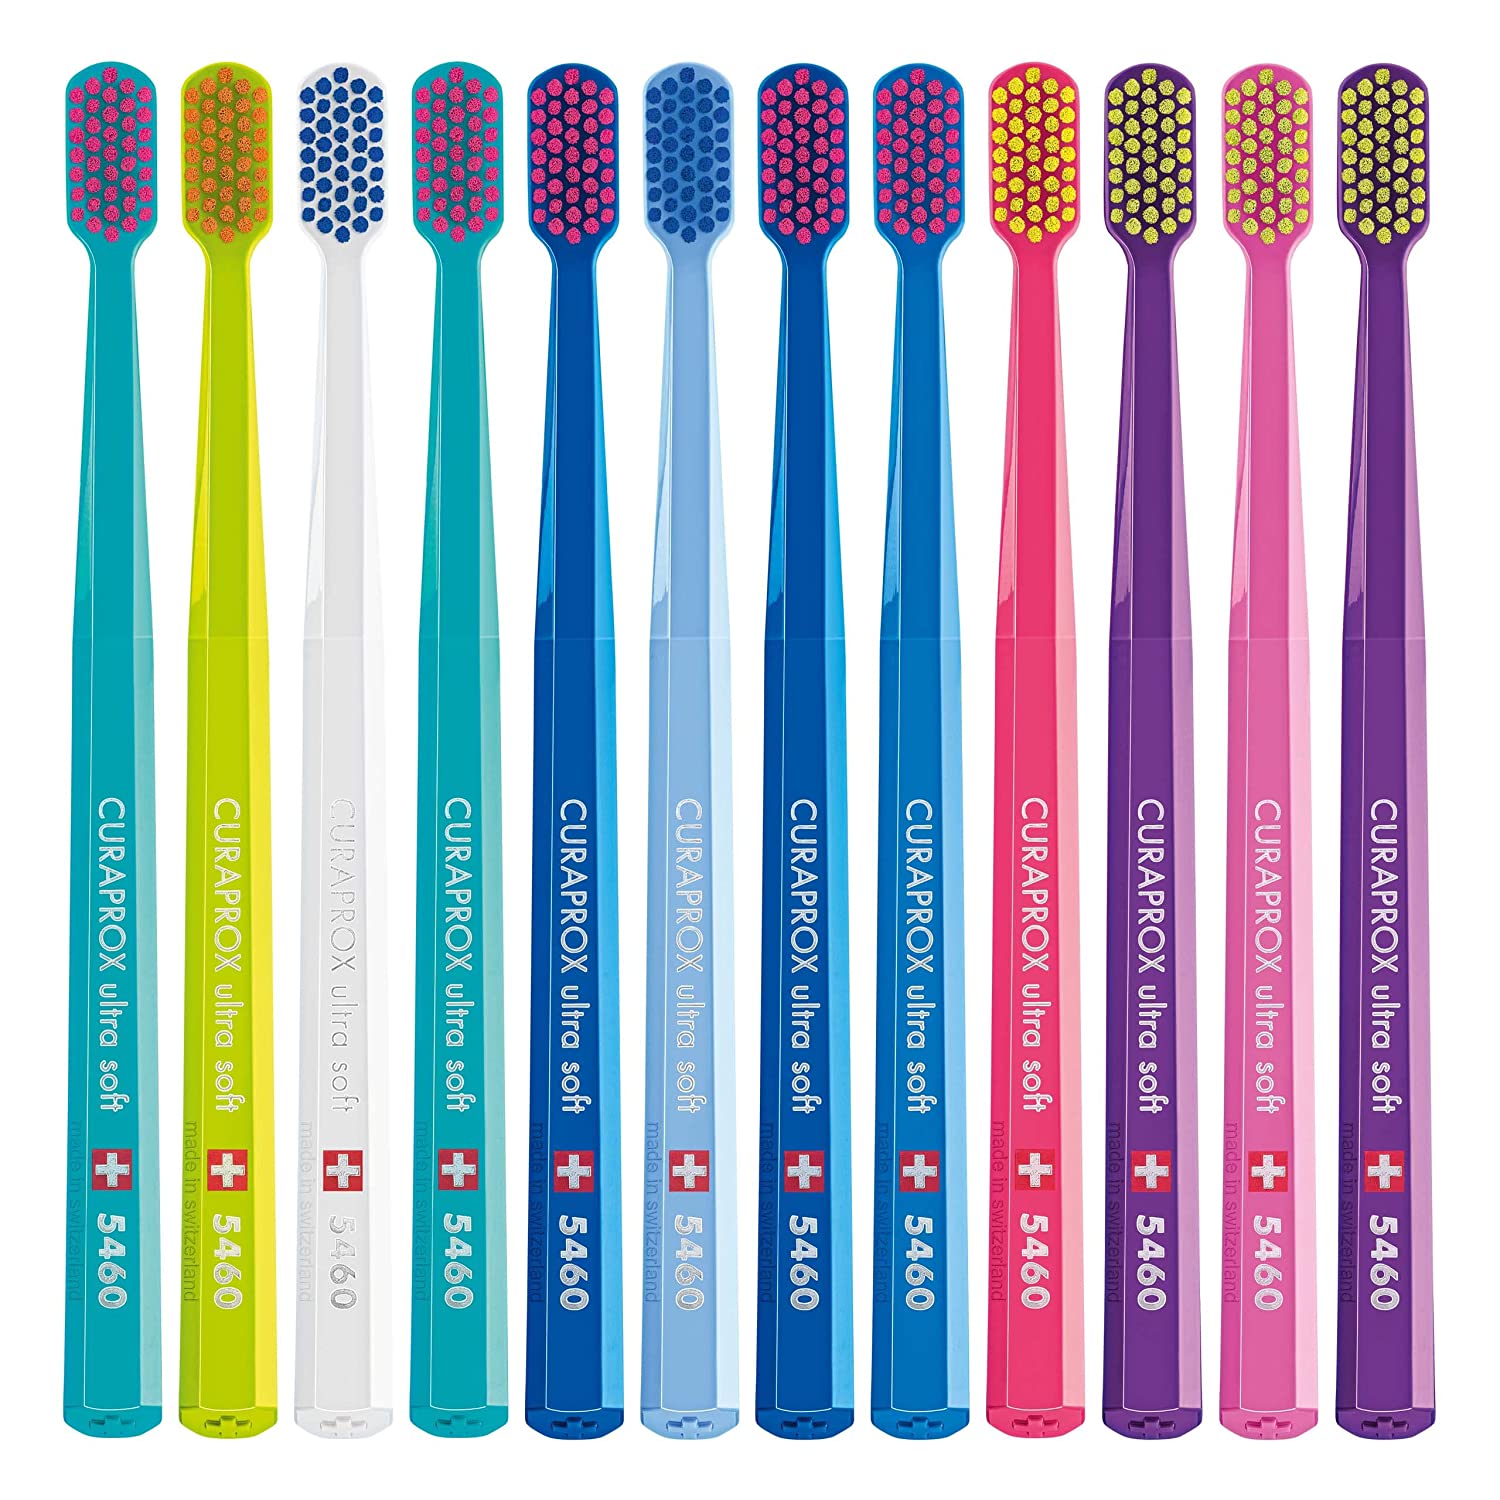 Curaprox - CS 5460 Ultra Soft Toothbrush (Assorted Colors)